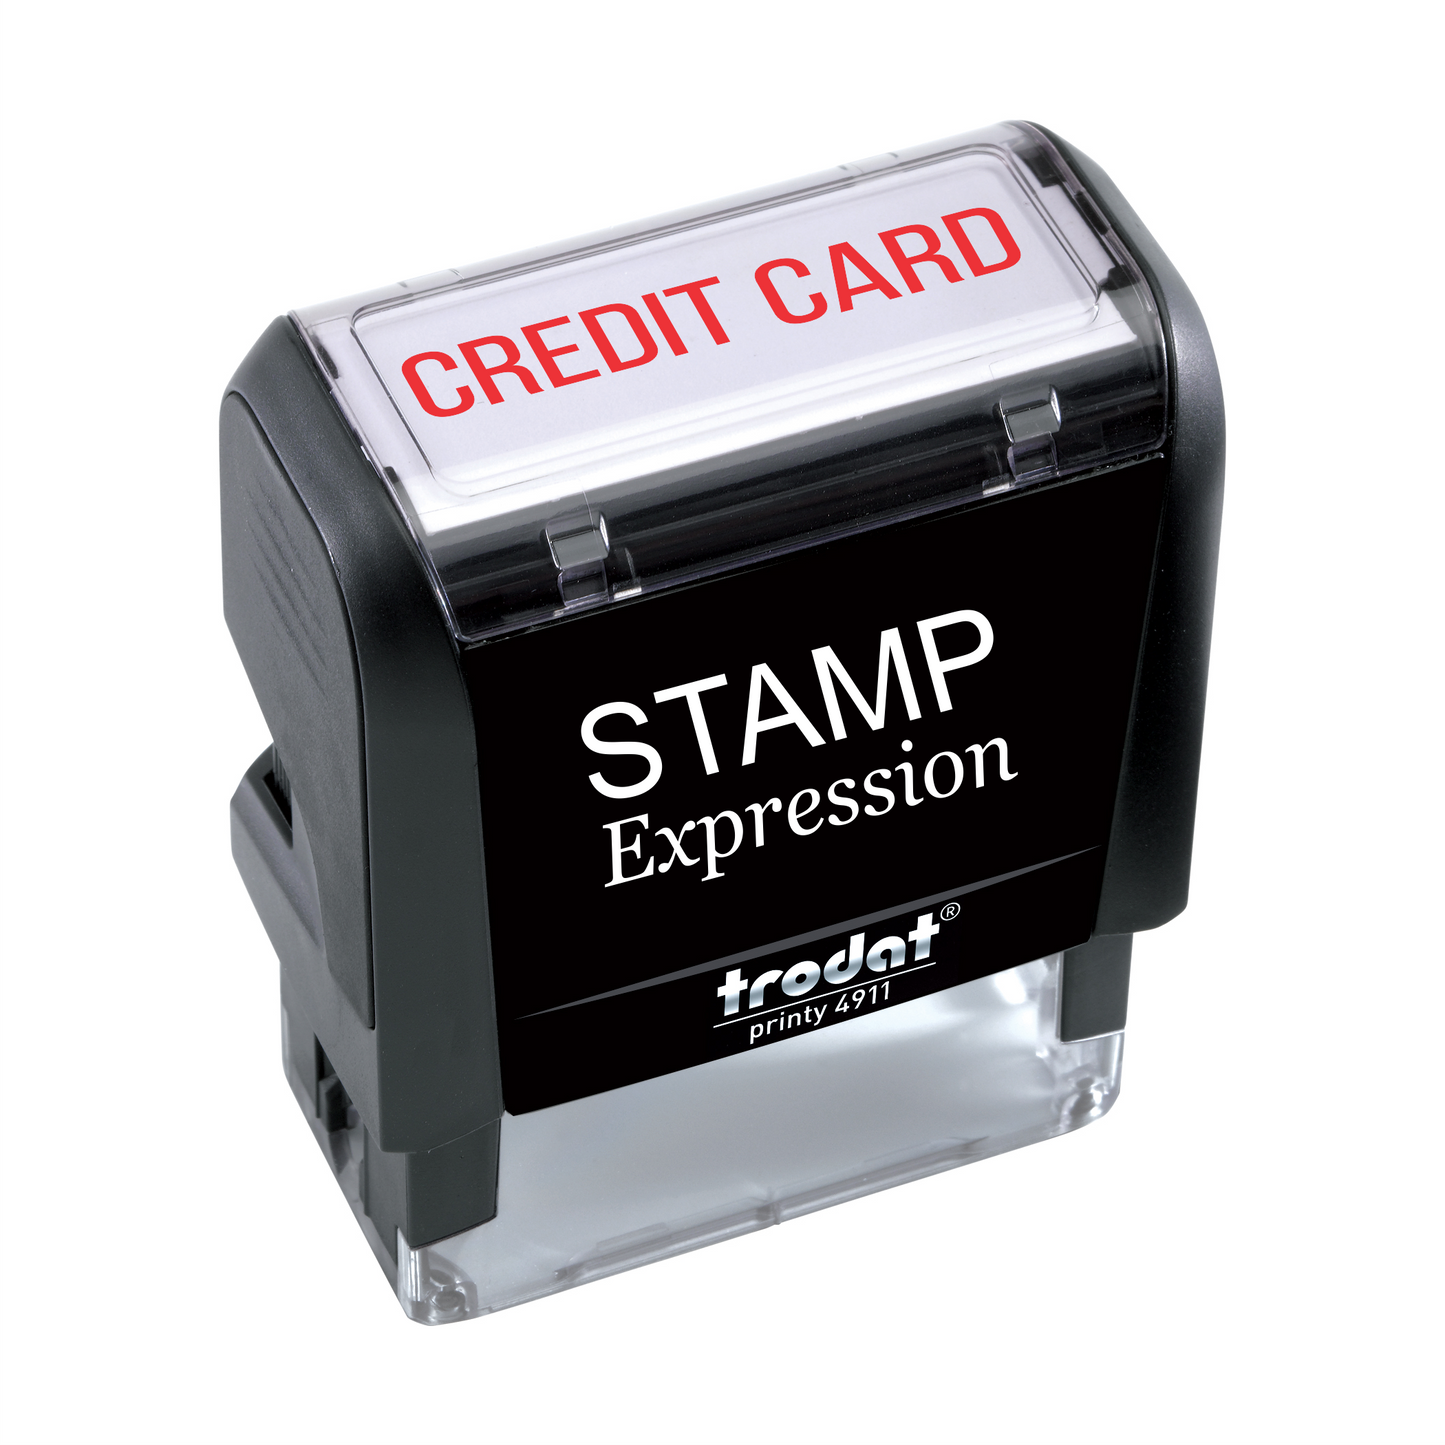 Credit Card Office Self Inking Rubber Stamp (SH-5688)